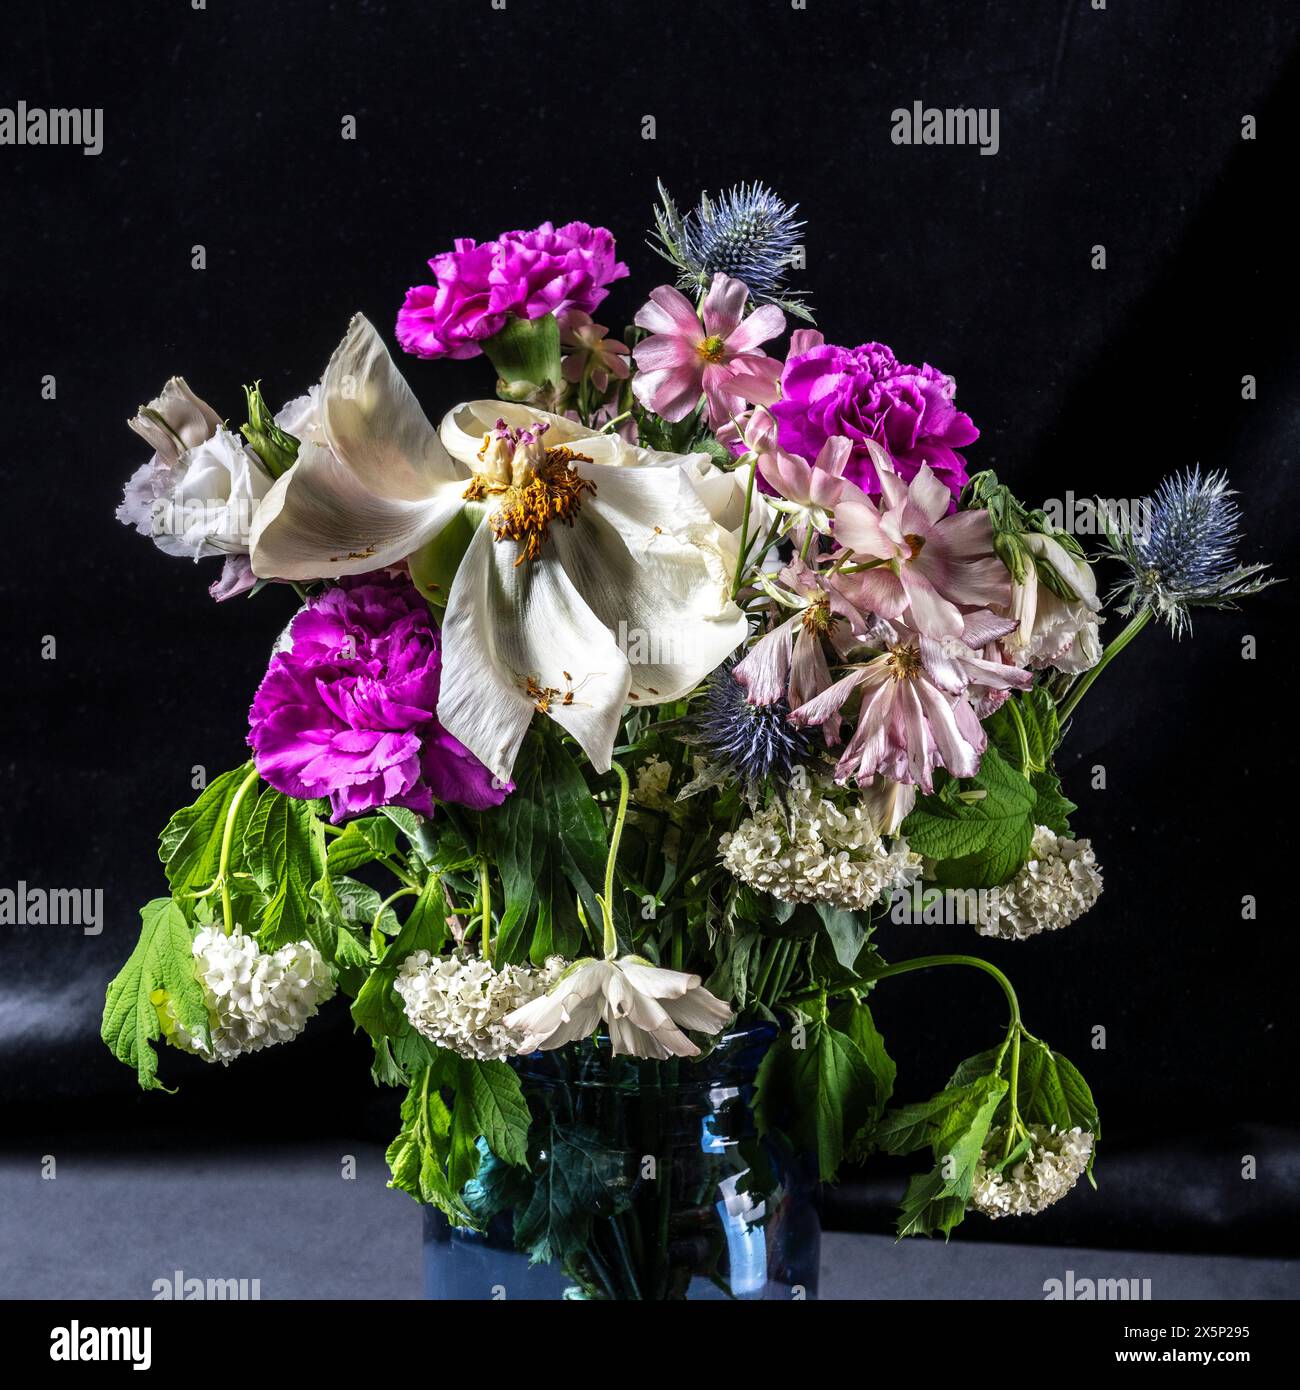 A delicate arrangement of old wilting flowers in a striking blue vase contrasts beautifully against the deep black background, symbolizing the passing Stock Photo